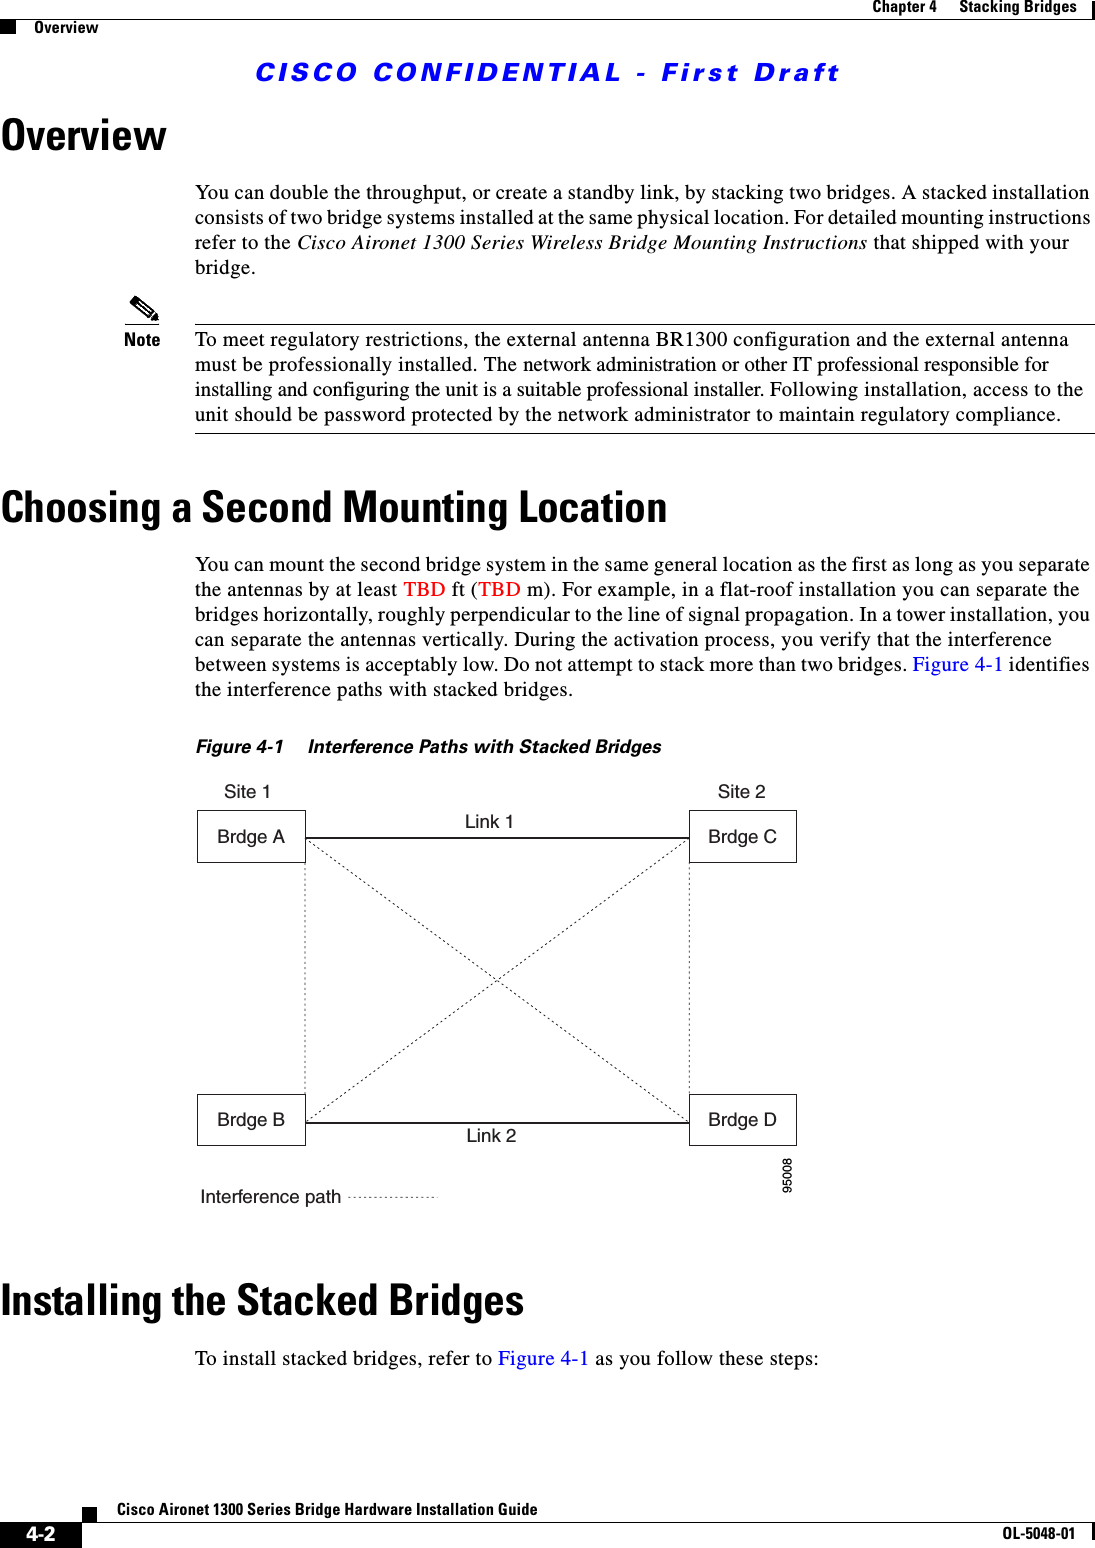 CISCO CONFIDENTIAL - First Draft4-2Cisco Aironet 1300 Series Bridge Hardware Installation GuideOL-5048-01Chapter 4      Stacking BridgesOverviewOverviewYou can double the throughput, or create a standby link, by stacking two bridges. A stacked installation consists of two bridge systems installed at the same physical location. For detailed mounting instructions refer to the Cisco Aironet 1300 Series Wireless Bridge Mounting Instructions that shipped with your bridge.Note To meet regulatory restrictions, the external antenna BR1300 configuration and the external antenna must be professionally installed. The network administration or other IT professional responsible for installing and configuring the unit is a suitable professional installer. Following installation, access to the unit should be password protected by the network administrator to maintain regulatory compliance.Choosing a Second Mounting LocationYou can mount the second bridge system in the same general location as the first as long as you separate the antennas by at least TBD ft (TBD m). For example, in a flat-roof installation you can separate the bridges horizontally, roughly perpendicular to the line of signal propagation. In a tower installation, you can separate the antennas vertically. During the activation process, you verify that the interference between systems is acceptably low. Do not attempt to stack more than two bridges. Figure 4-1 identifies the interference paths with stacked bridges.Figure 4-1 Interference Paths with Stacked BridgesInstalling the Stacked BridgesTo install stacked bridges, refer to Figure 4-1 as you follow these steps:95008Brdge B Link 2Link 1Site 1 Site 2Interference pathBrdge ABrdge DBrdge C